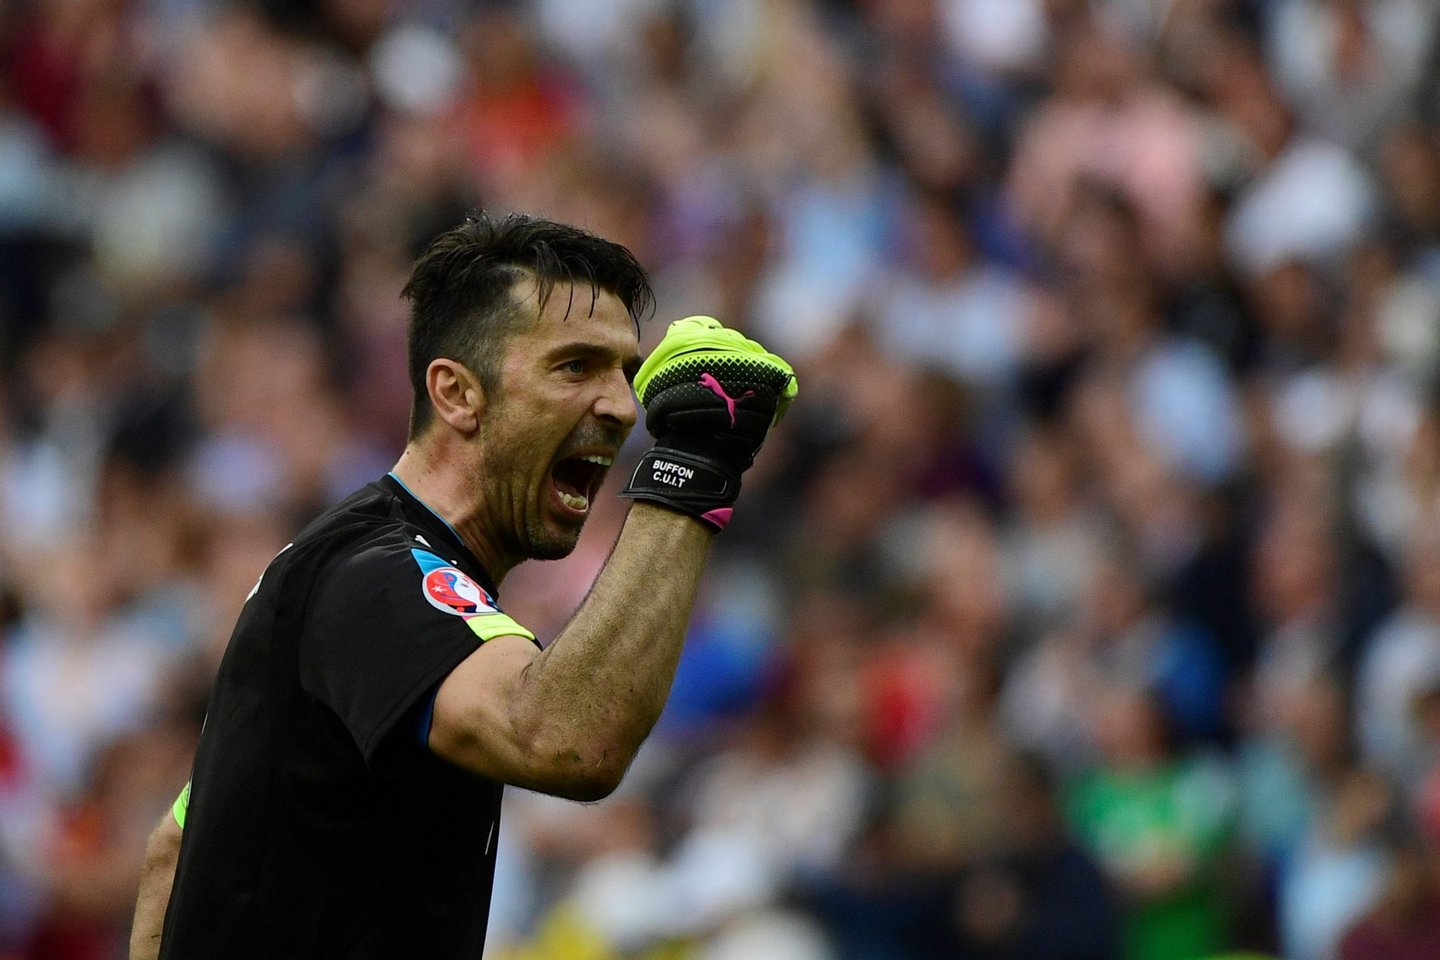 Italy's goalkeeper Gianluigi Buffon celebrates his team's win after the Euro 2016 round of 16 football match between Italy and Spain at the Stade de France stadium in Saint-Denis, near Paris, on June 27, 2016. Italy won the match 2:0. / AFP / PIERRE-PHILIPPE MARCOU (Photo credit should read PIERRE-PHILIPPE MARCOU/AFP/Getty Images)